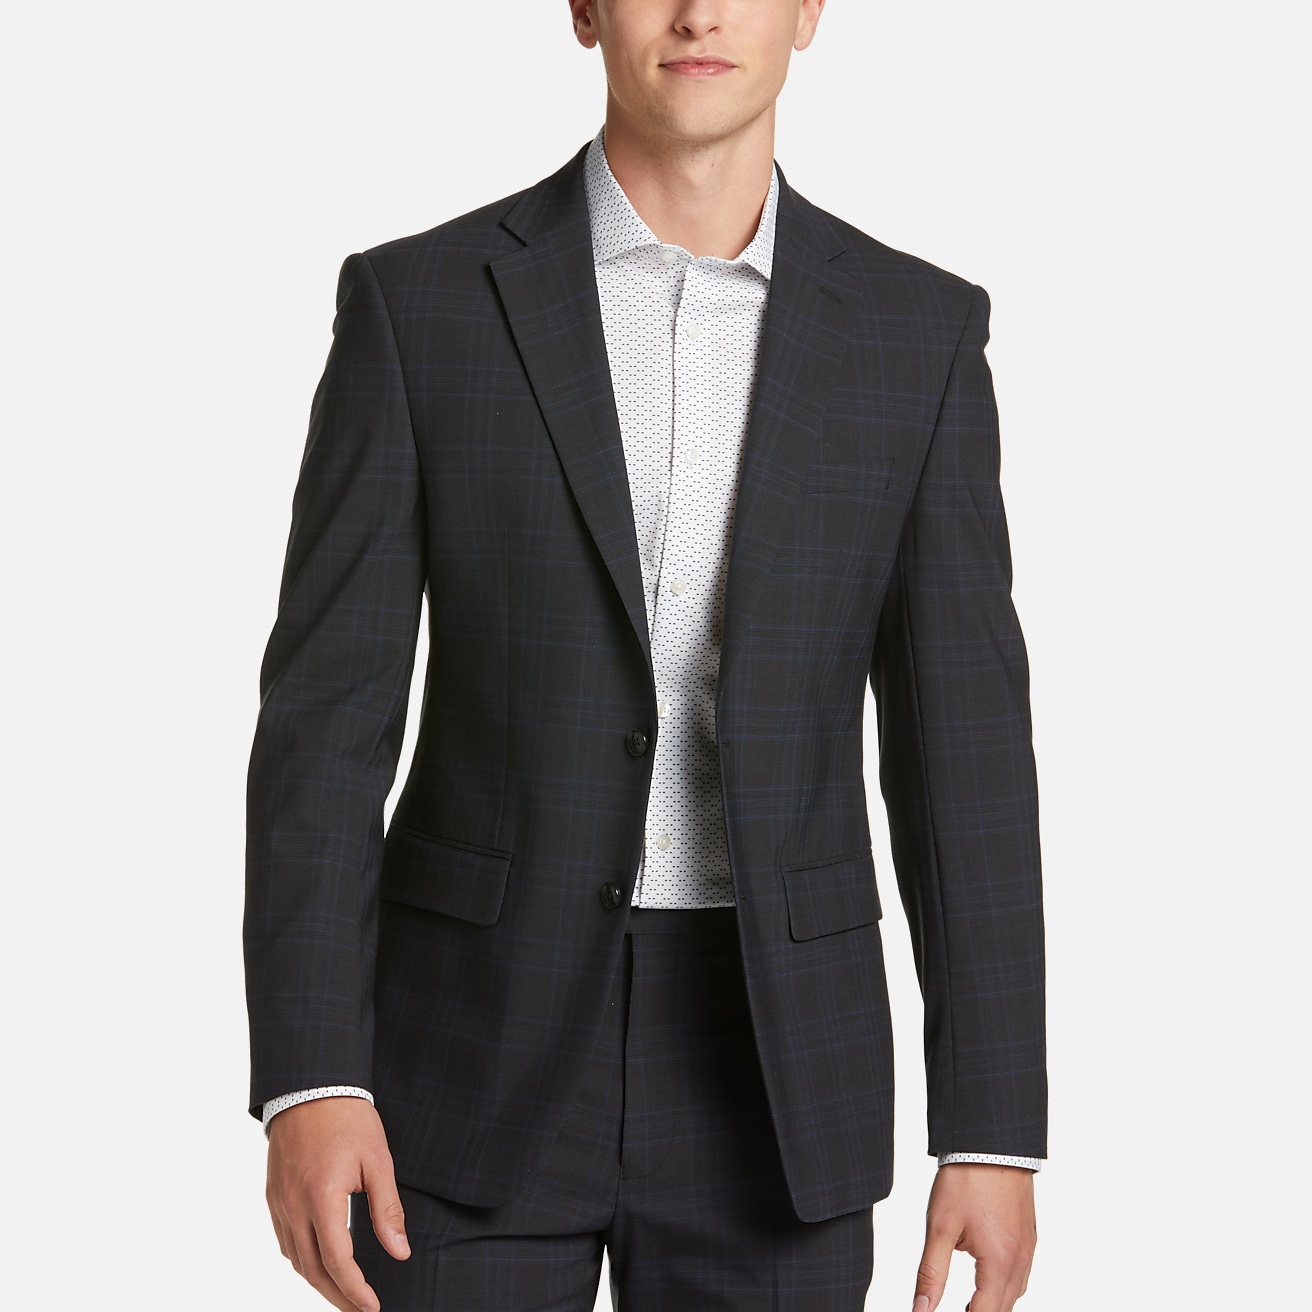 https://image.menswearhouse.com/is/image/TMW/TMW_3W56_66_CALVIN_KLEIN_2_PIECE_SUITS_CHARCOAL_PLAID_MAIN?imPolicy=pdp-mob-2x